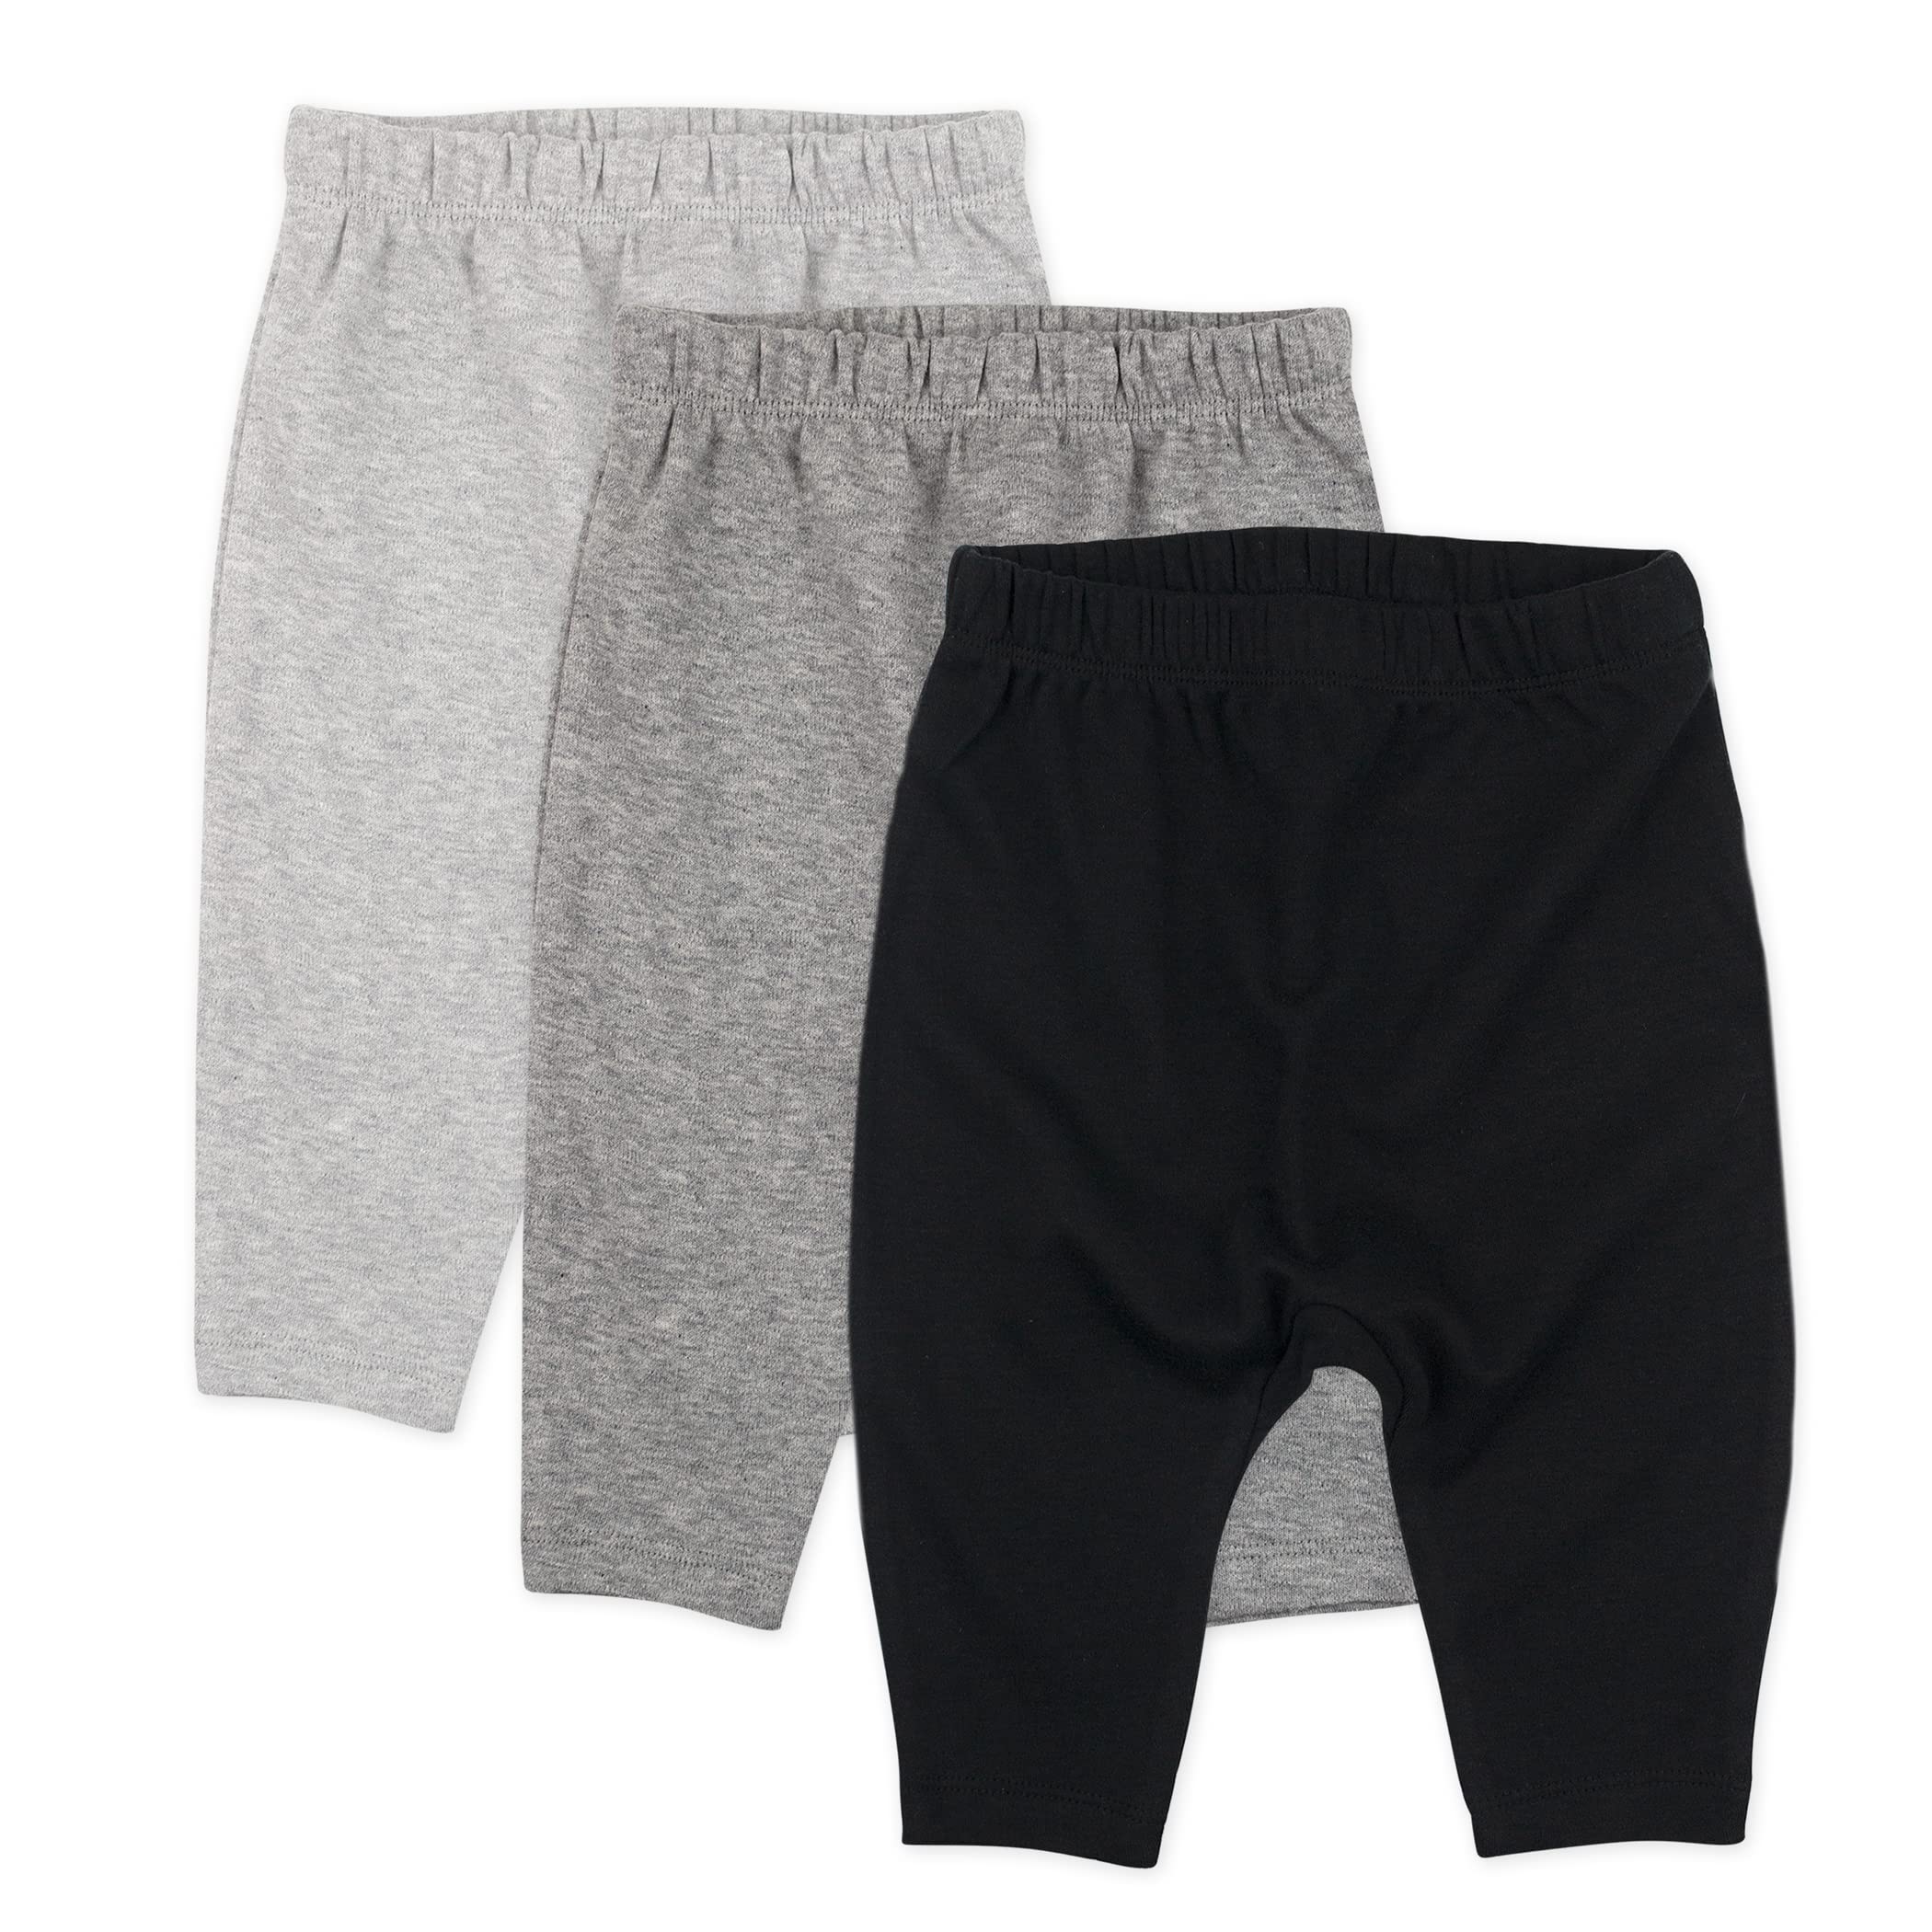 3-Count HonestBaby Baby Boys' or Girls' 100% Cotton Harem Pants (Grey & Black, Size NB-18M) $9.44 + Free Shipping with Prime or $35+